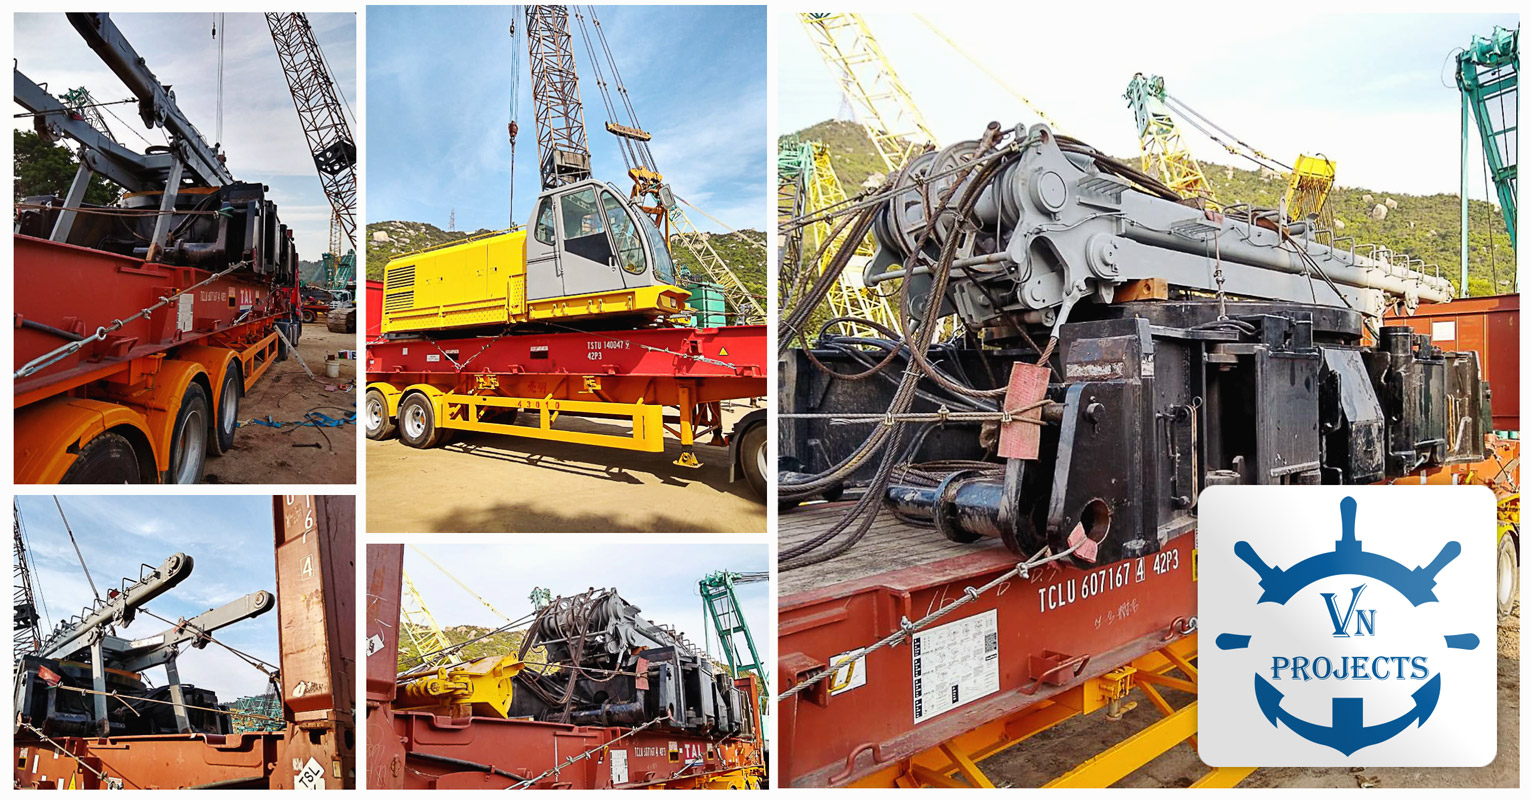 VN Projects Shipped a 250 ton Dismantled Crawler Crane from Hong Kong to Ho Chi Minh